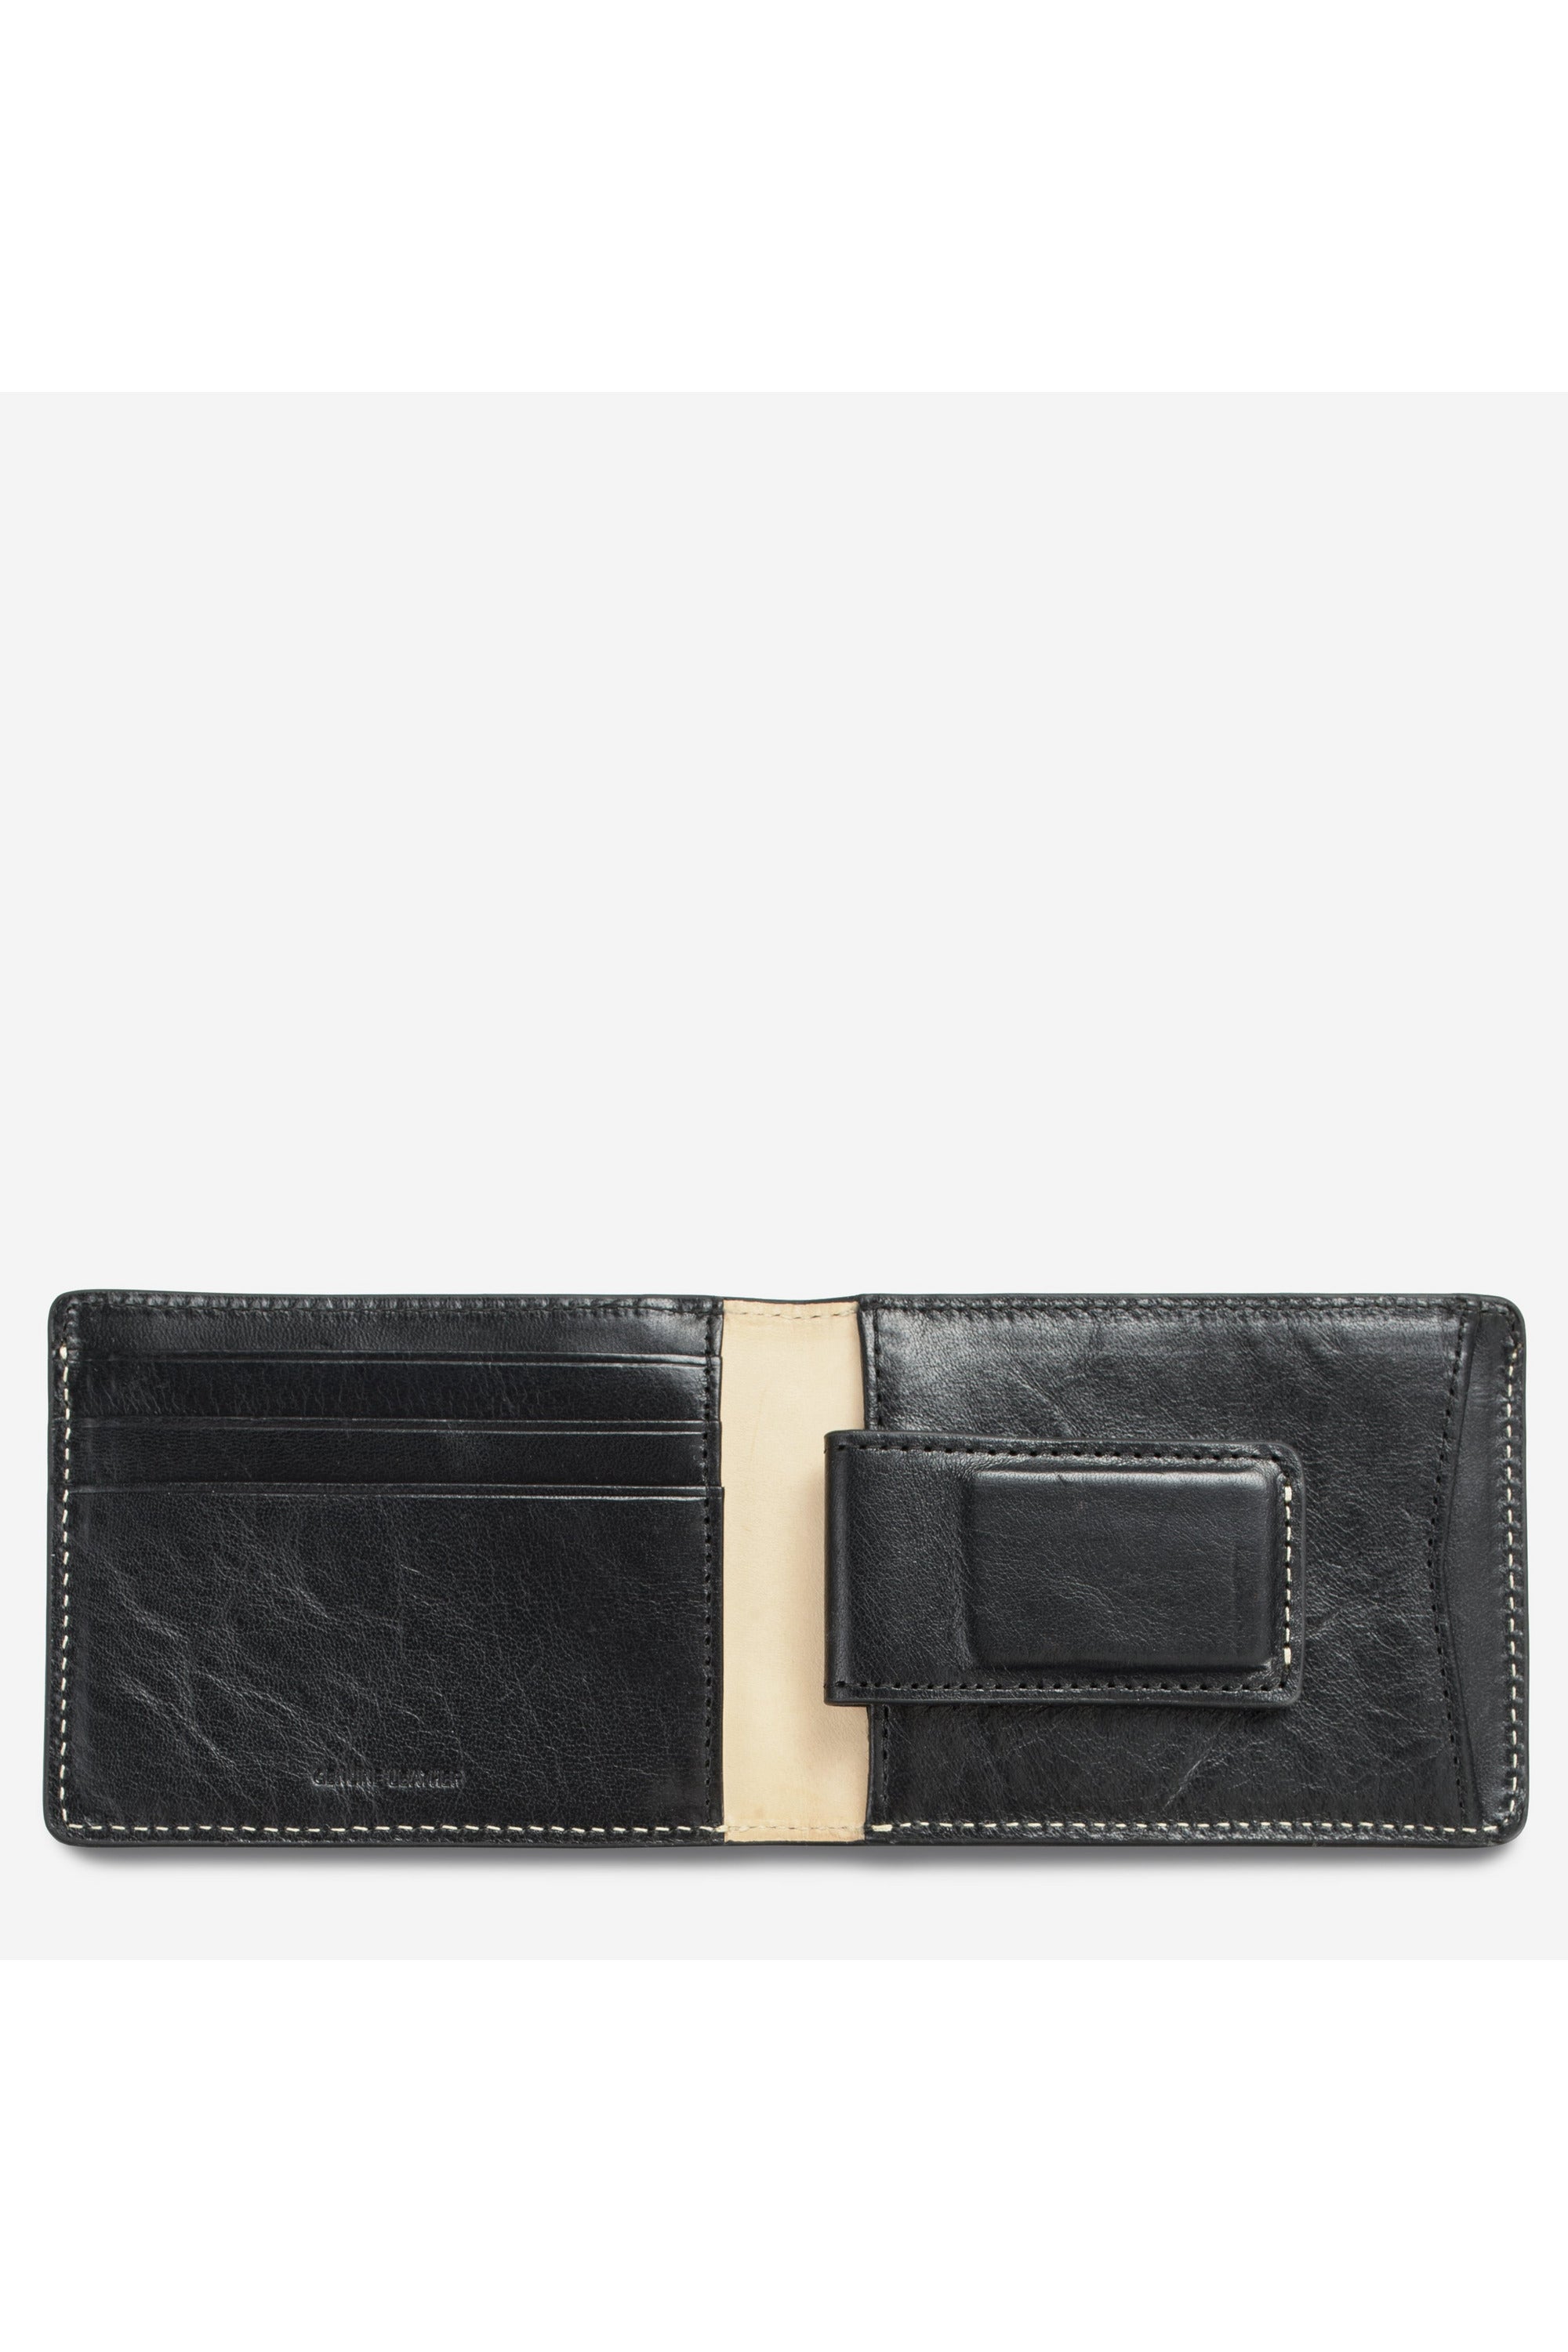 Status Anxiety - Ethan Wallet - Black